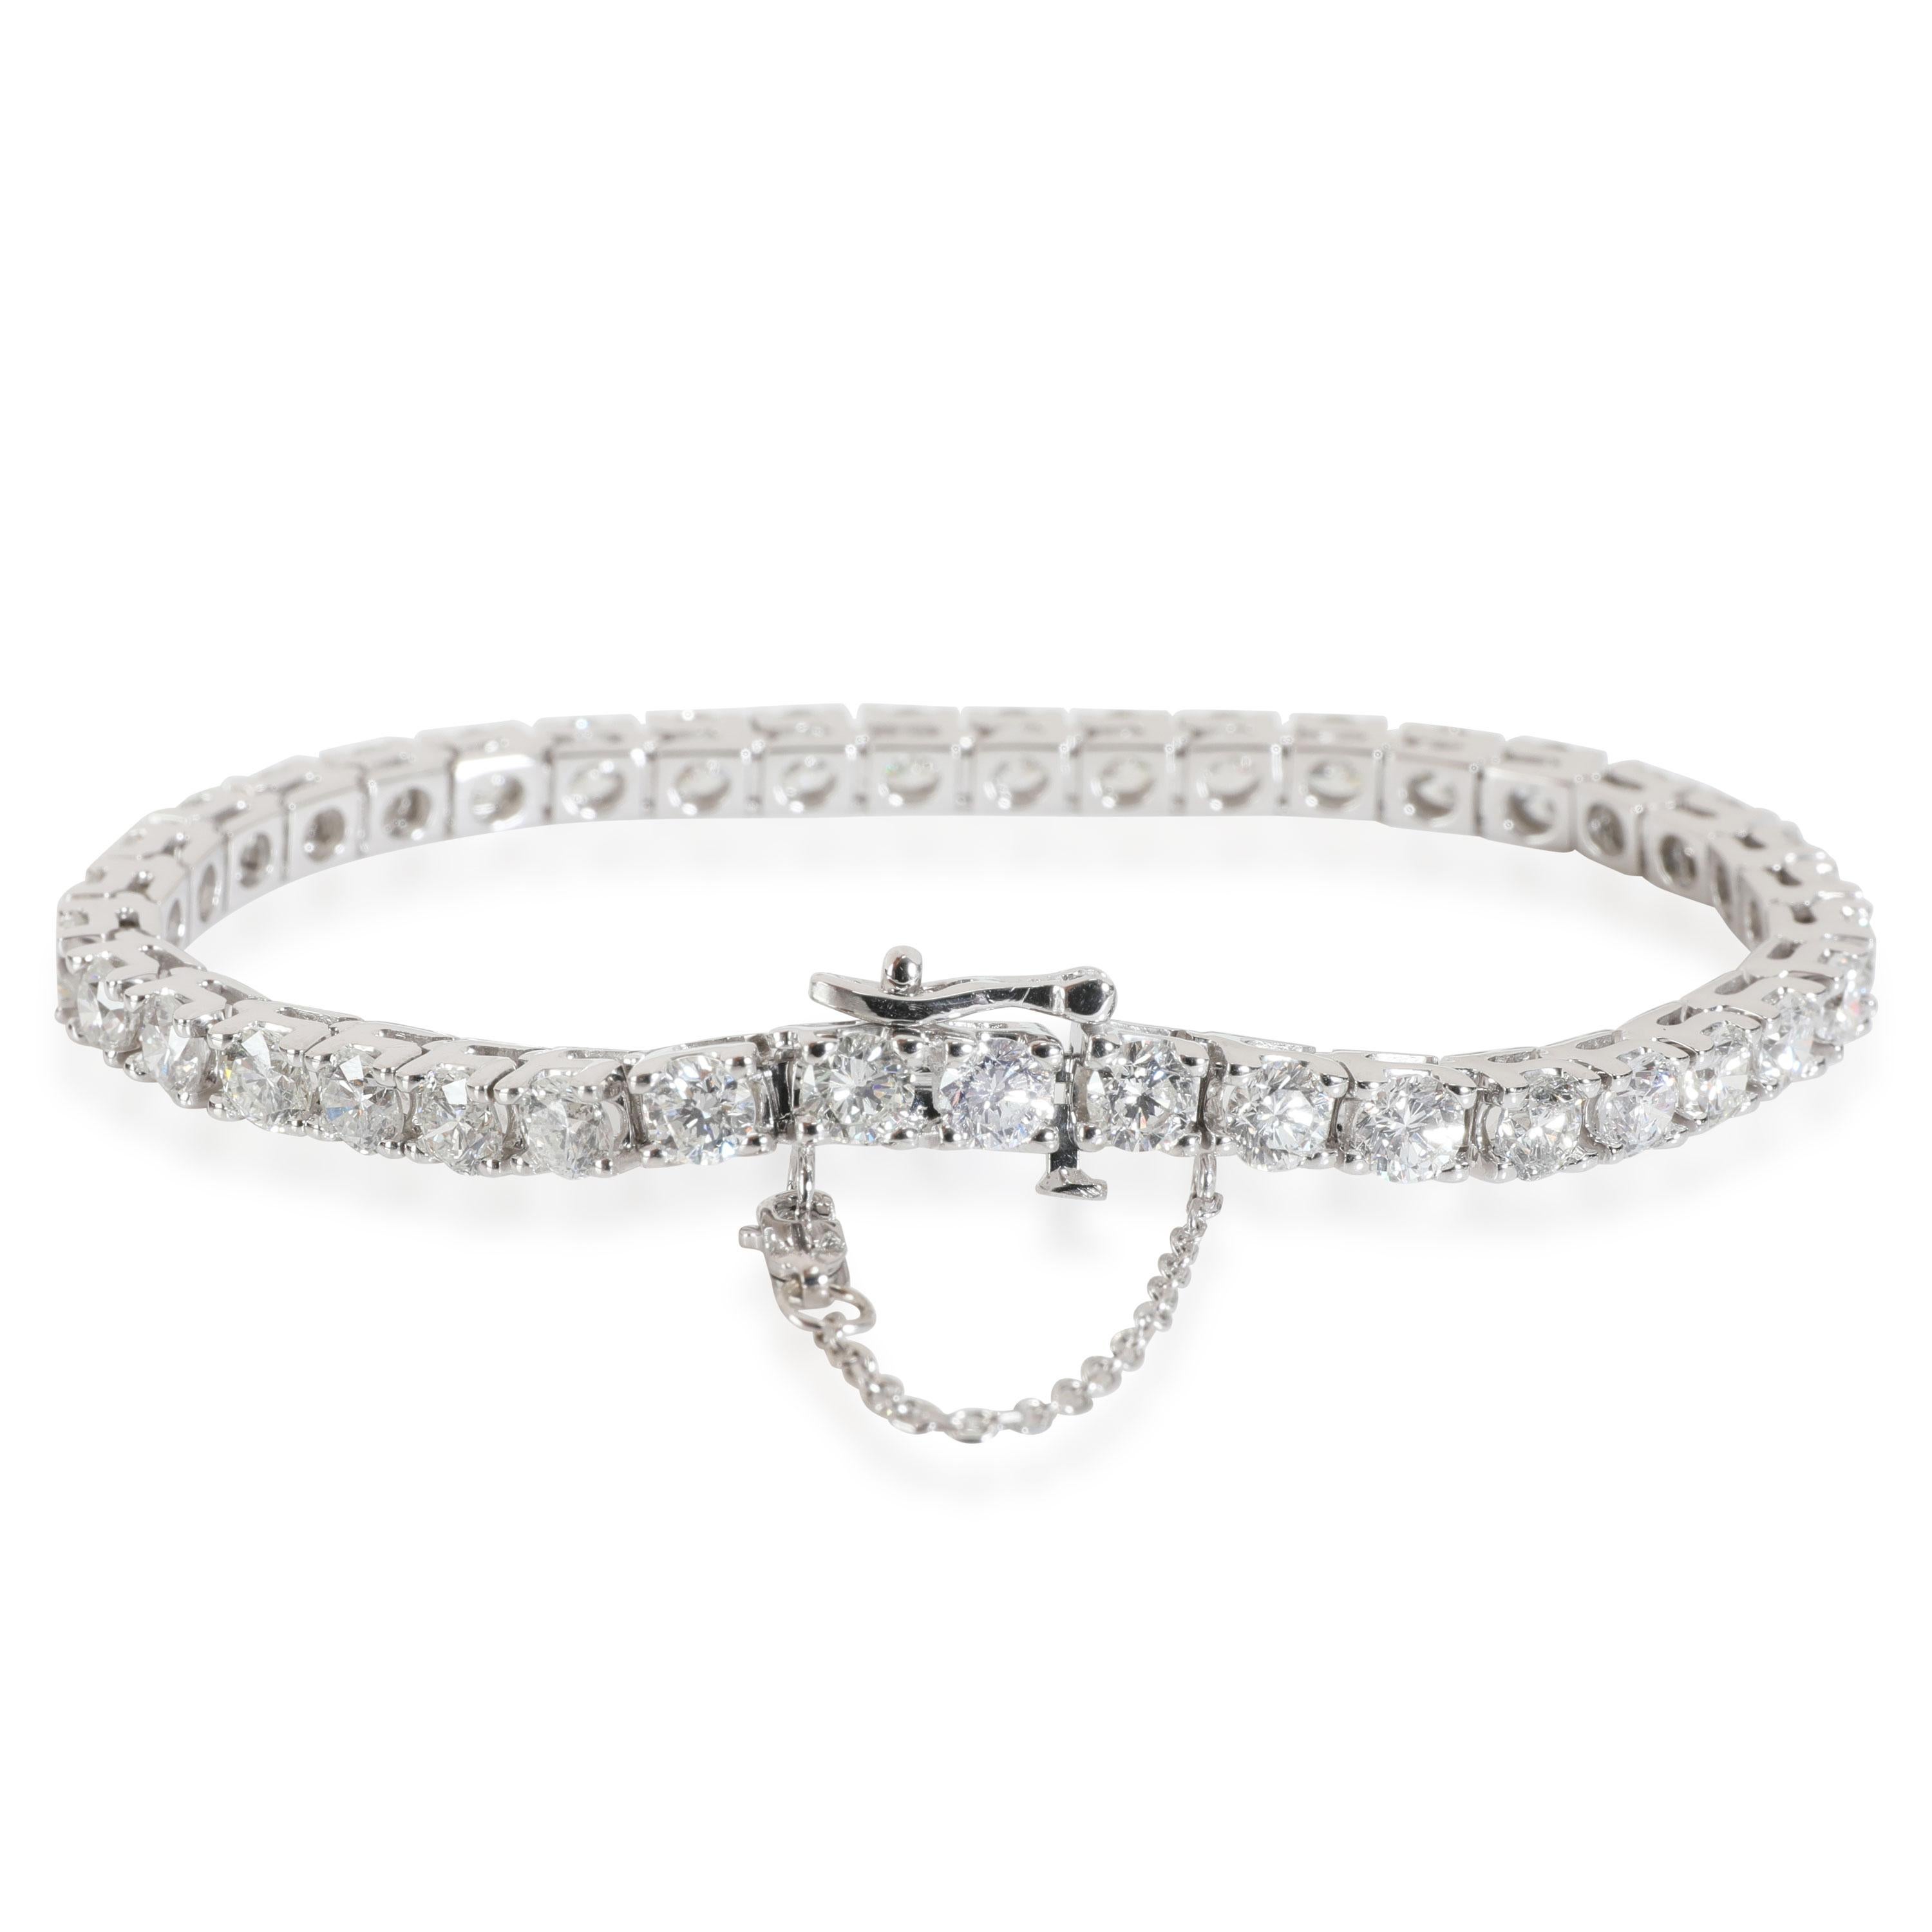 
Diamond Tennis Bracelet in 14K White Gold 9.98 CTW

PRIMARY DETAILS
SKU: 114547
Listing Title: Diamond Tennis Bracelet in 14K White Gold 9.98 CTW
Condition Description: In excellent condition and recently polished. Chain is 7 inches in